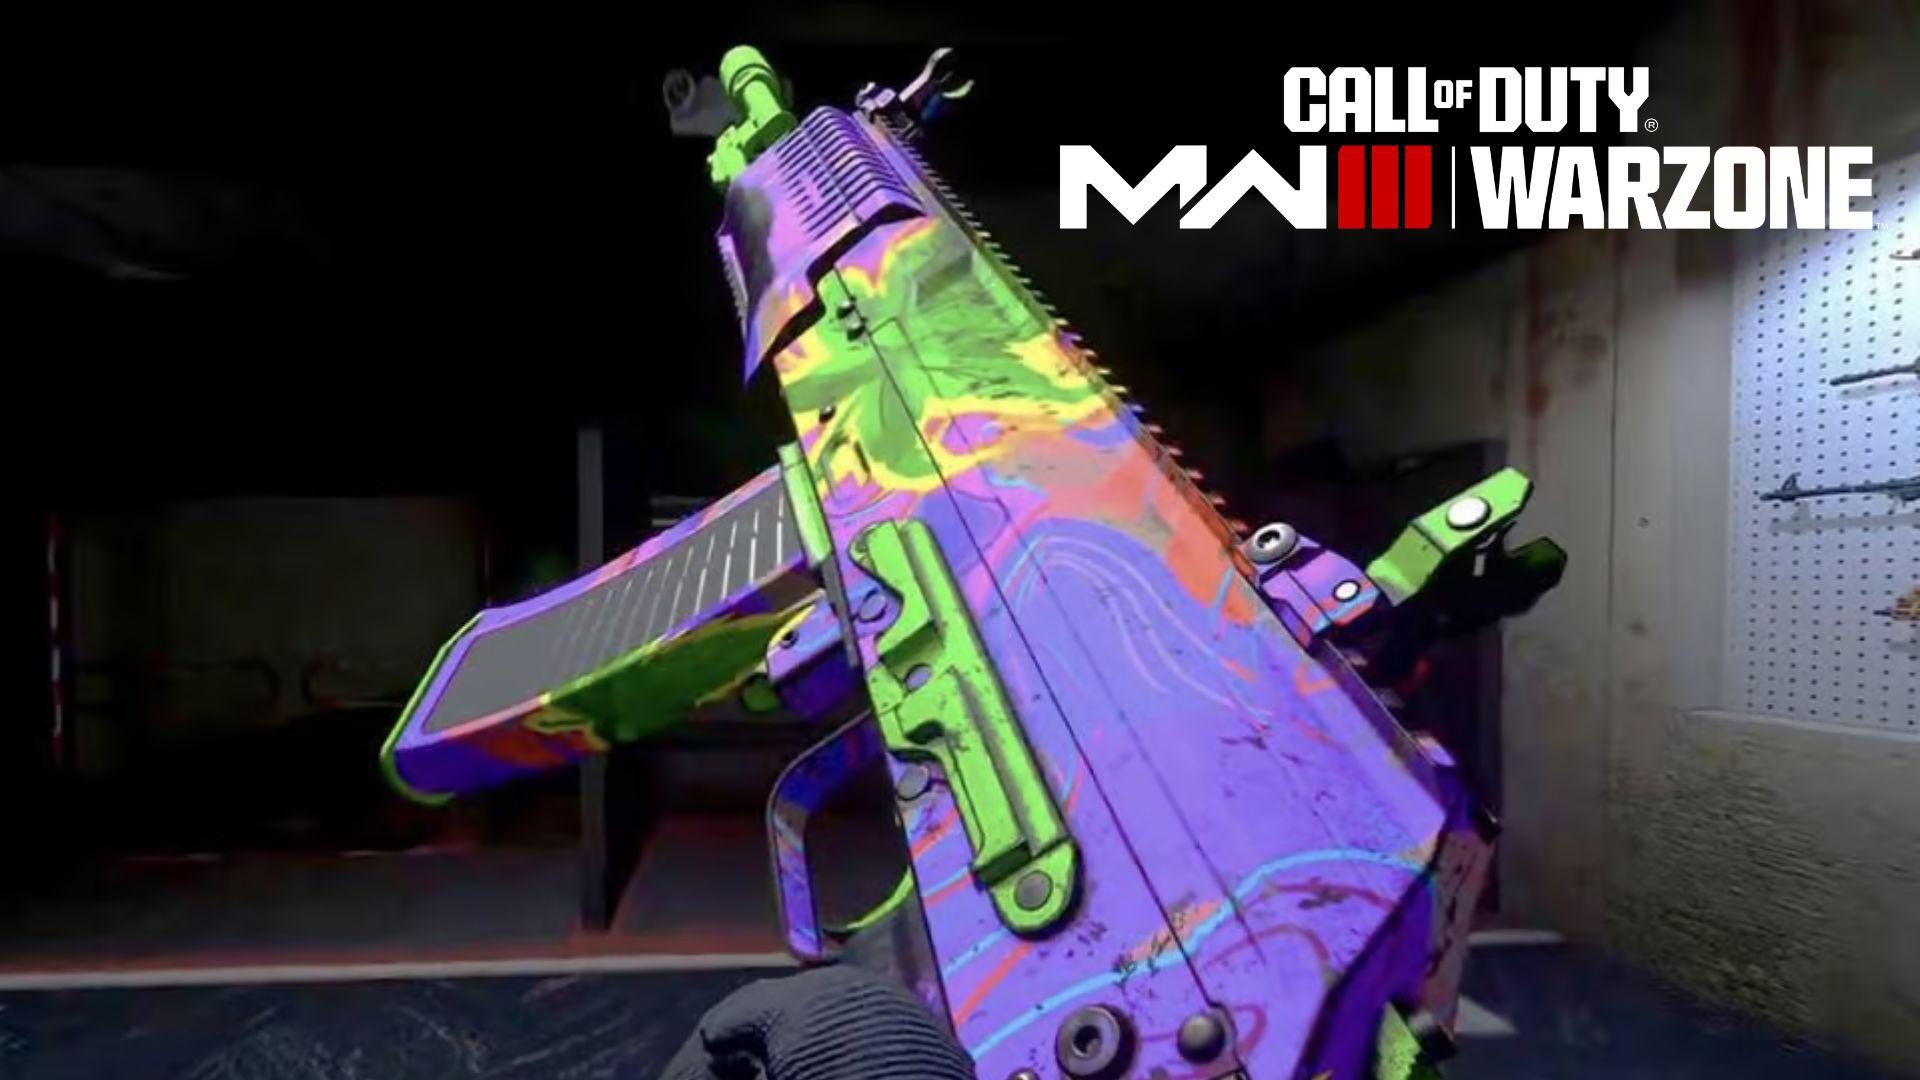 Purple, green and red skin being held up in call of duty firing range